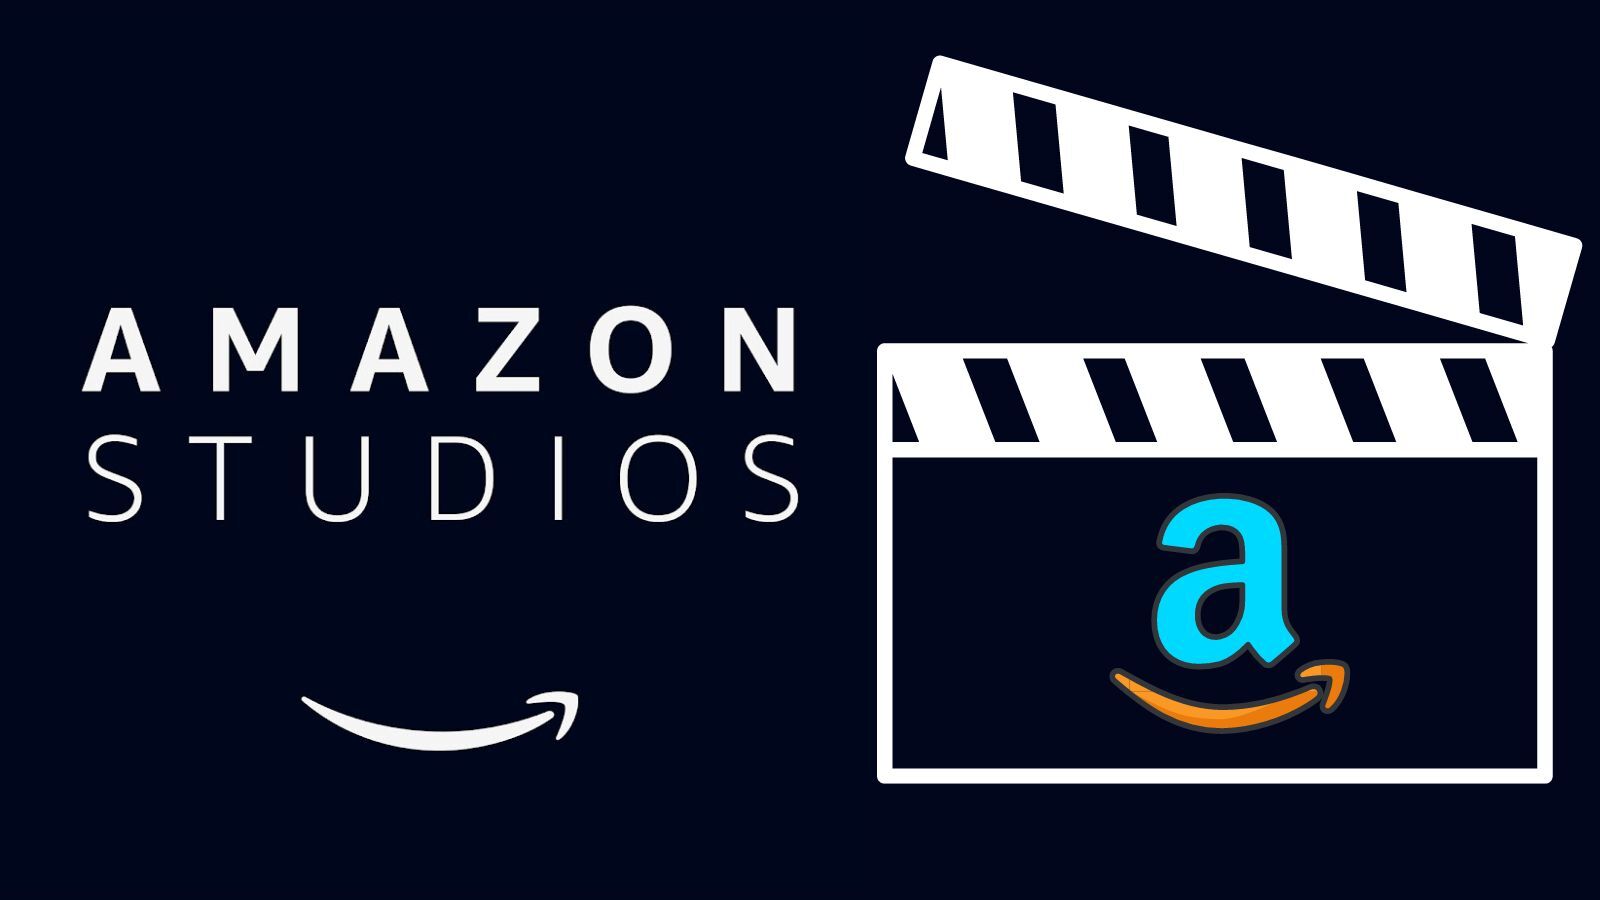 What Is Amazon Studios? (All You Need to Know)